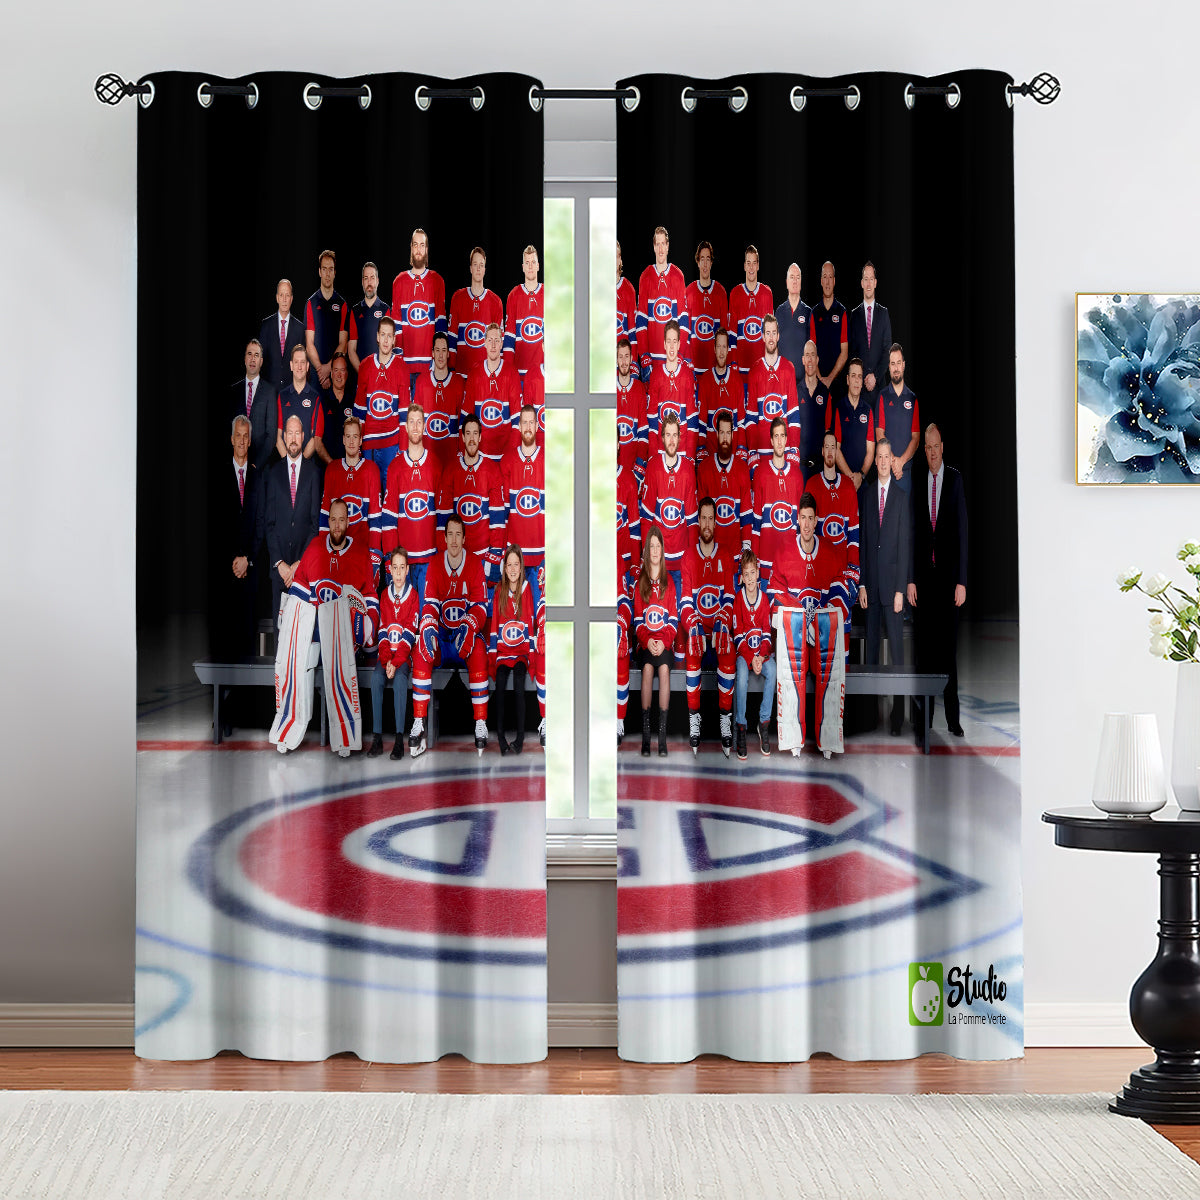 Montreal Canadiens Hockey League Blackout Curtains Drapes For Window Treatment Set